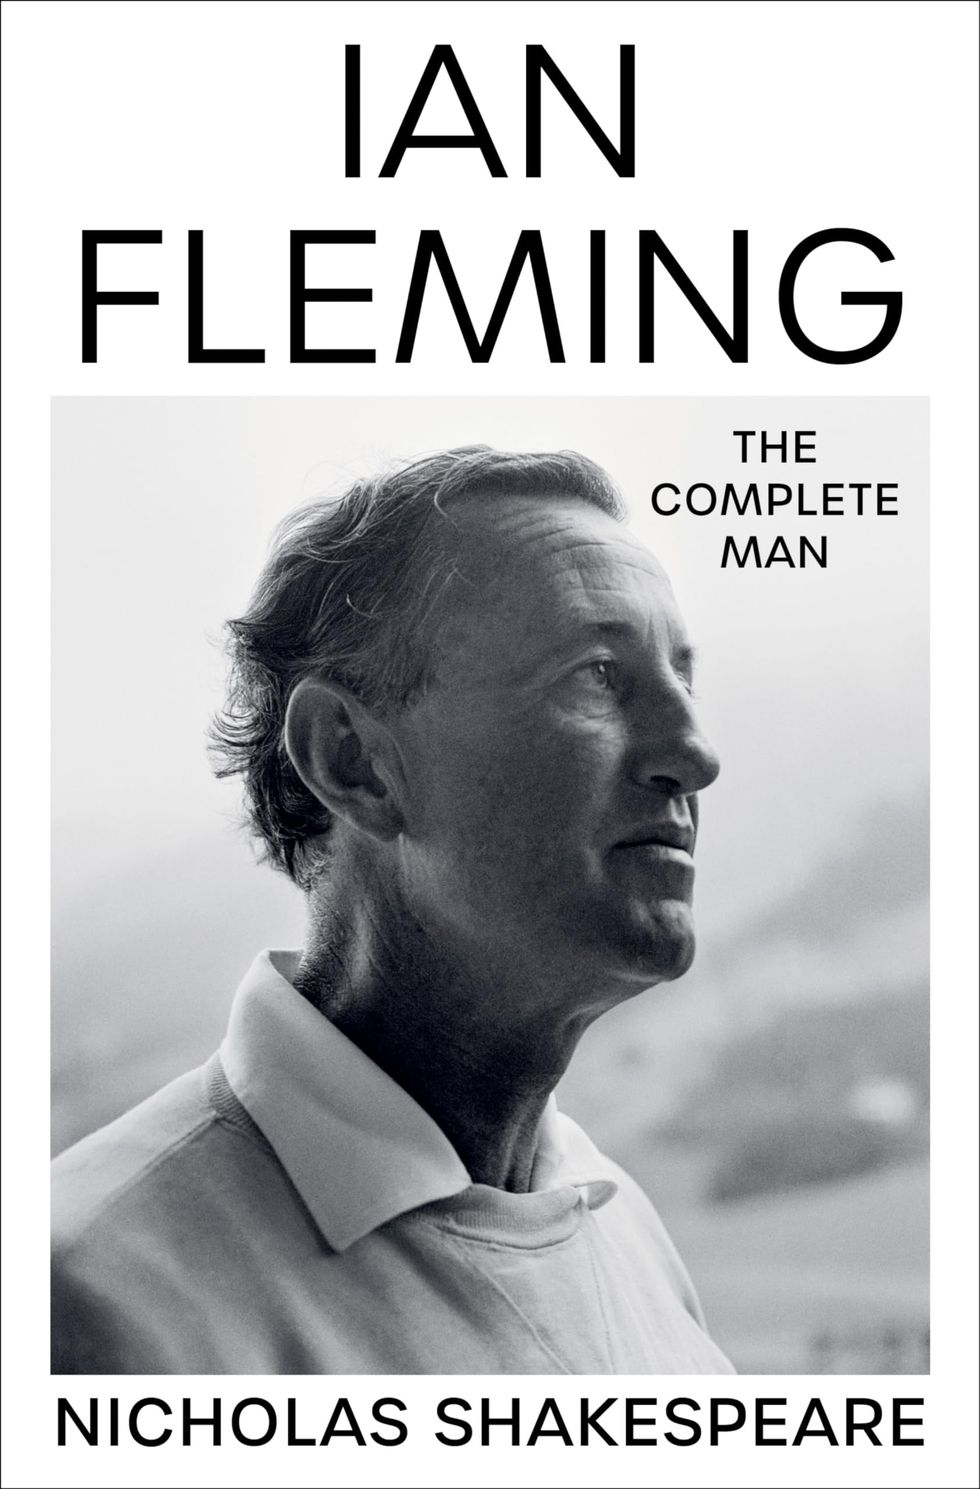 Ian Fleming: The Complete Man, by Nicholas Shakespeare